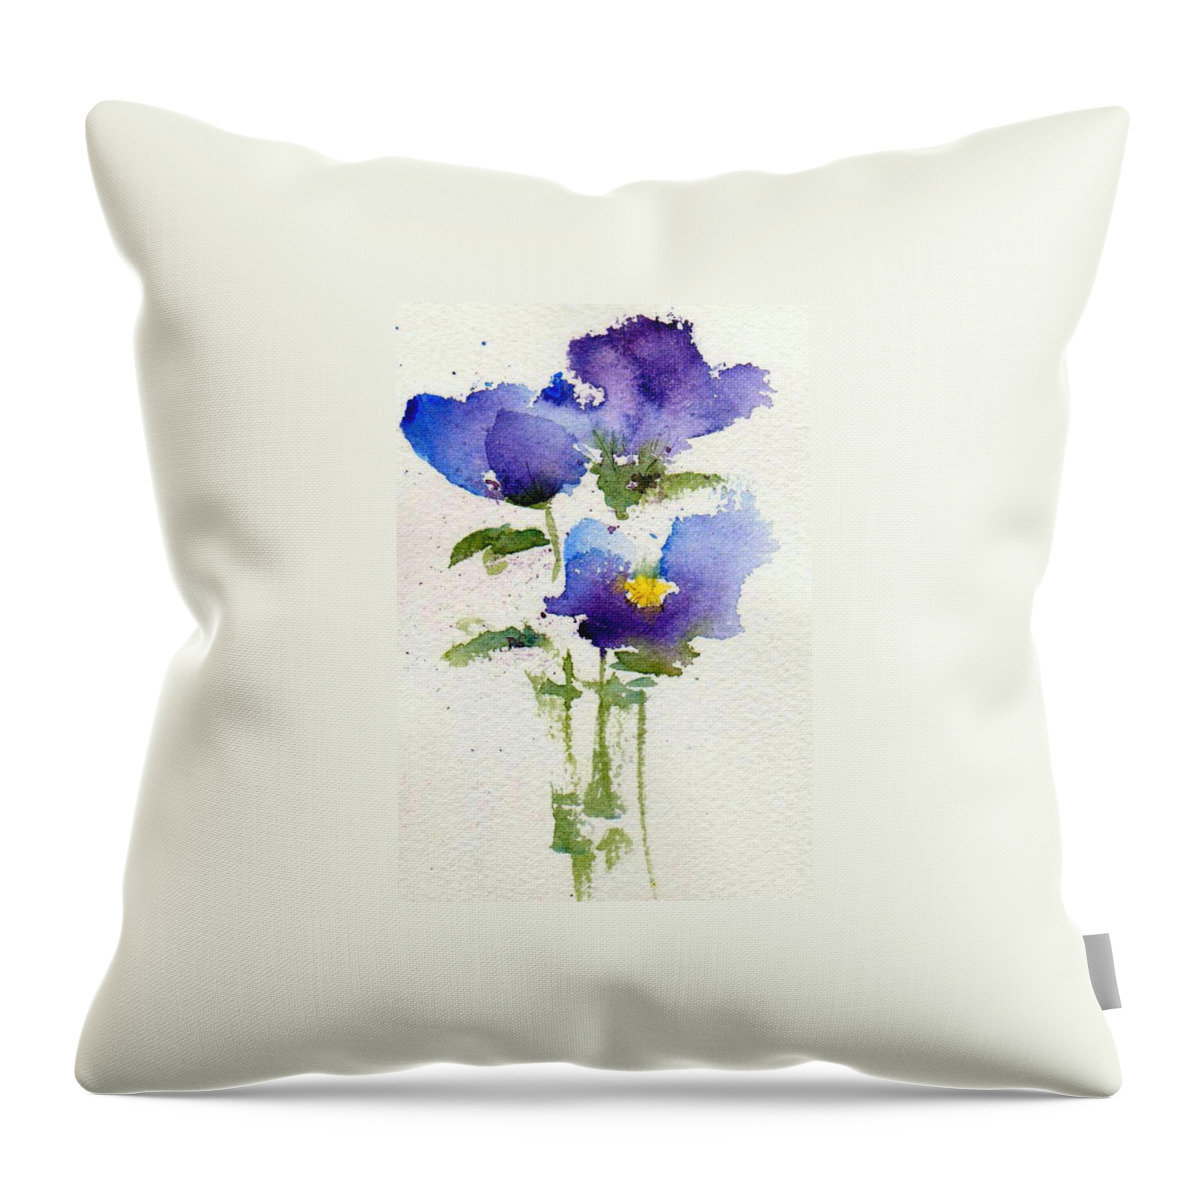 Violets Throw Pillow featuring the painting Violets by Anne Duke